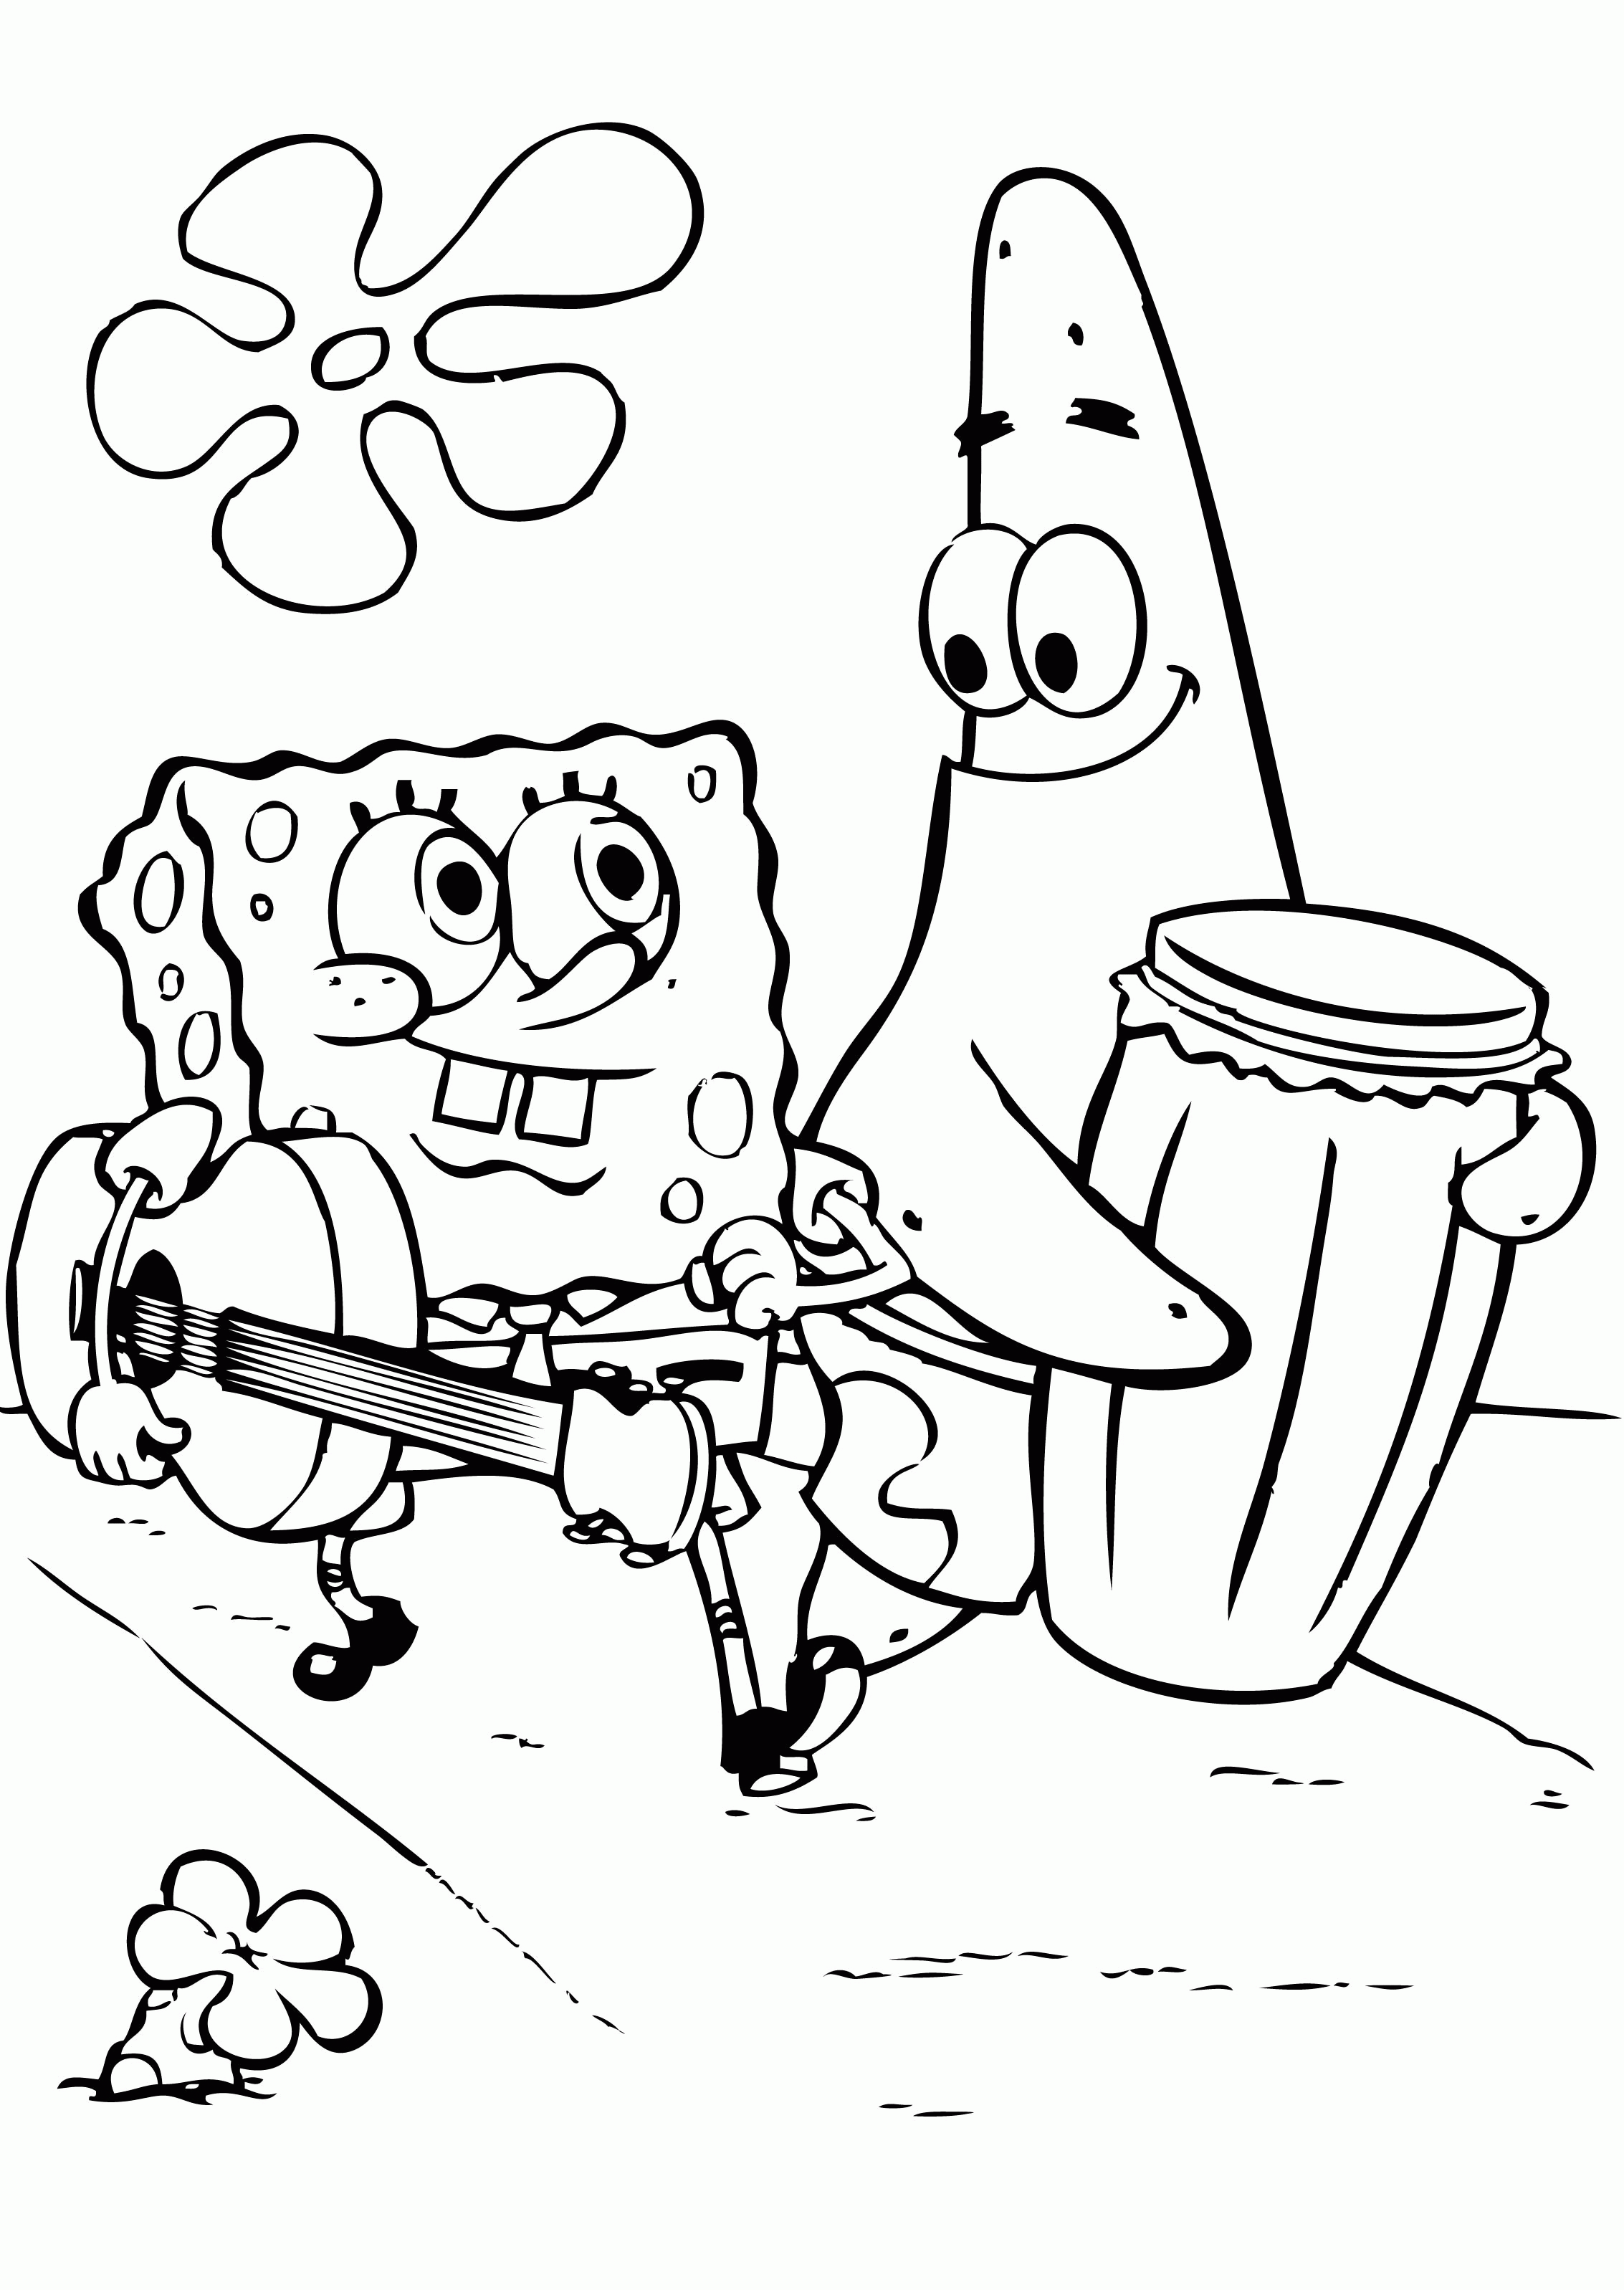 Spongebob Characters 41 Cool Coloring Page